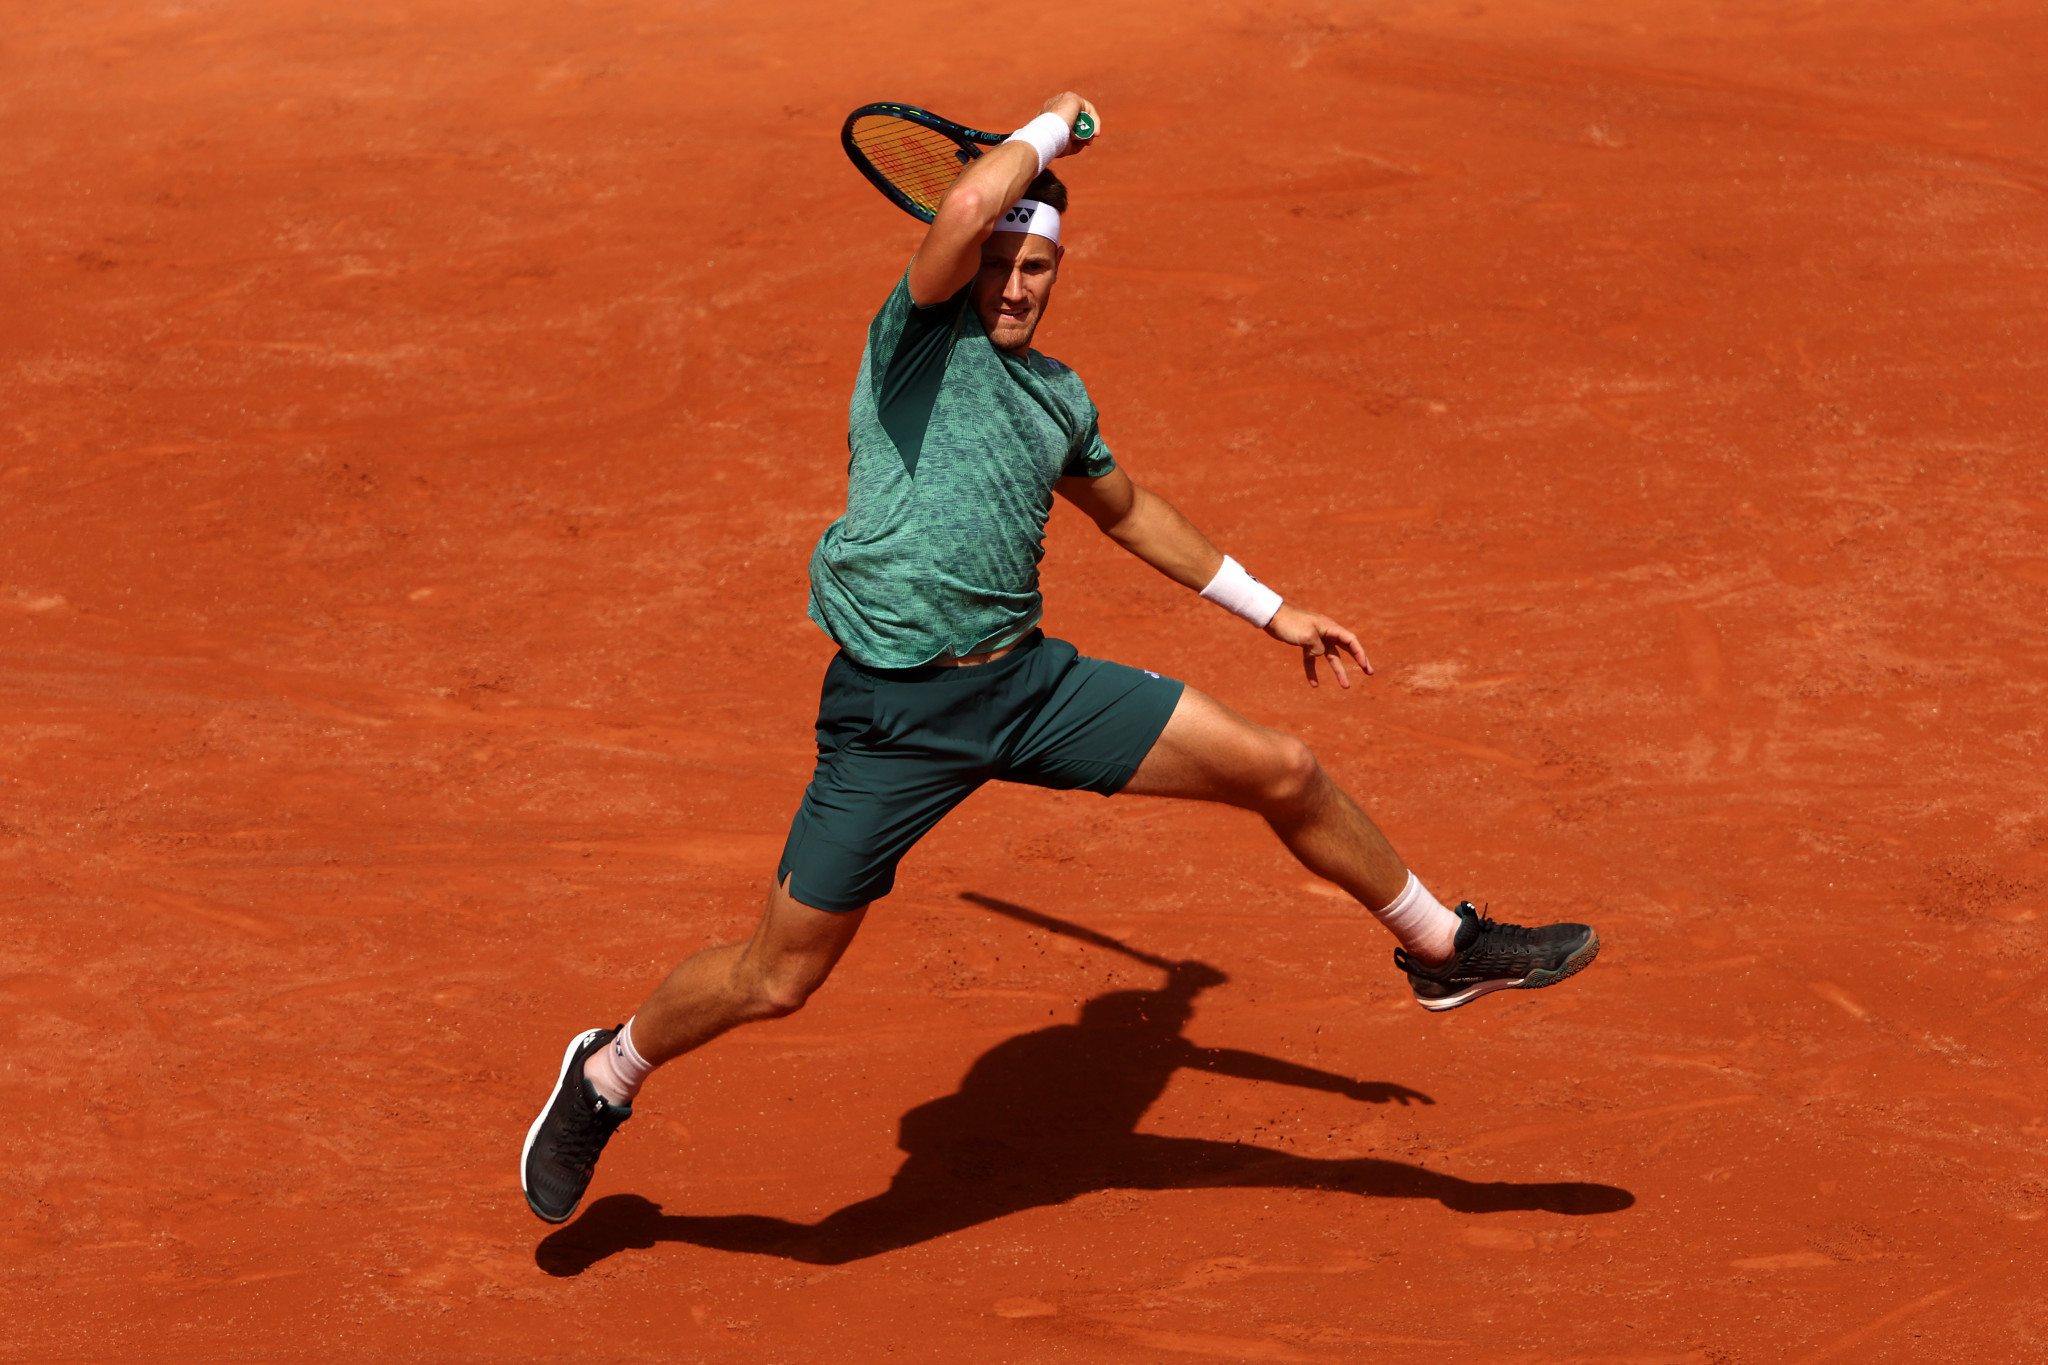 Men's eighth seed Casper Ruud was taken to five sets before reaching the French Open fourth round ©Getty Images